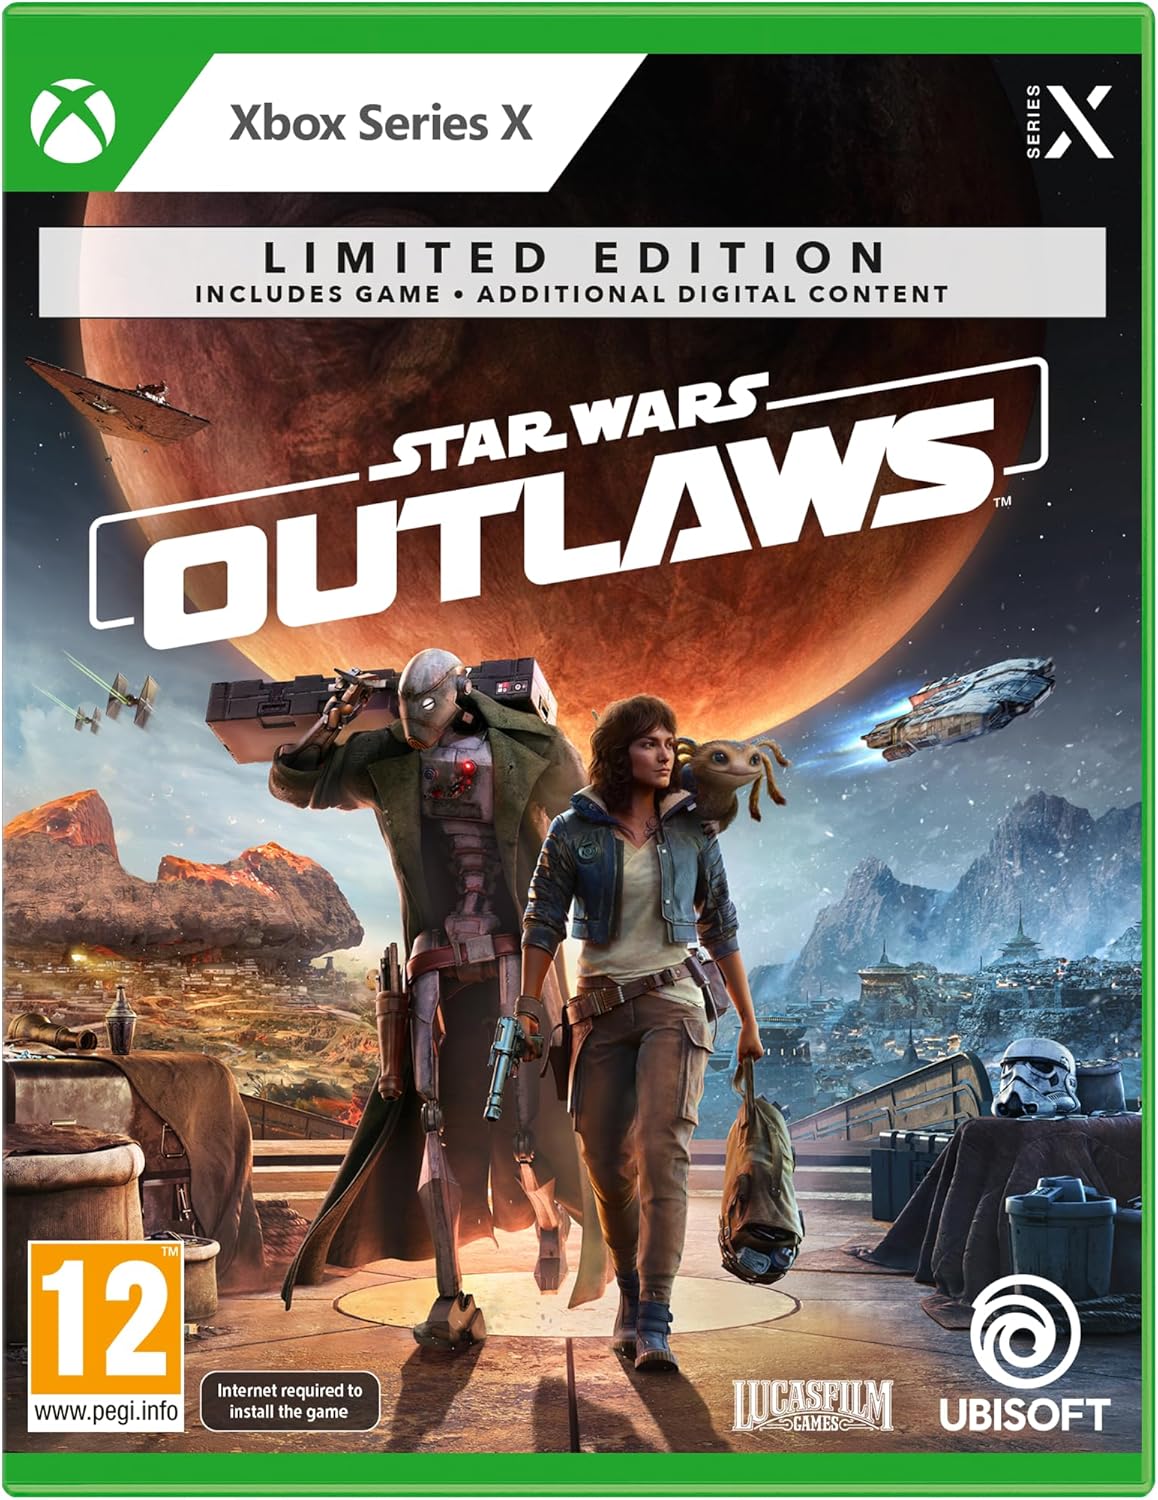 Star Wars Outlaws Digital Download Key (Xbox Series X|S): VPN Activated Key